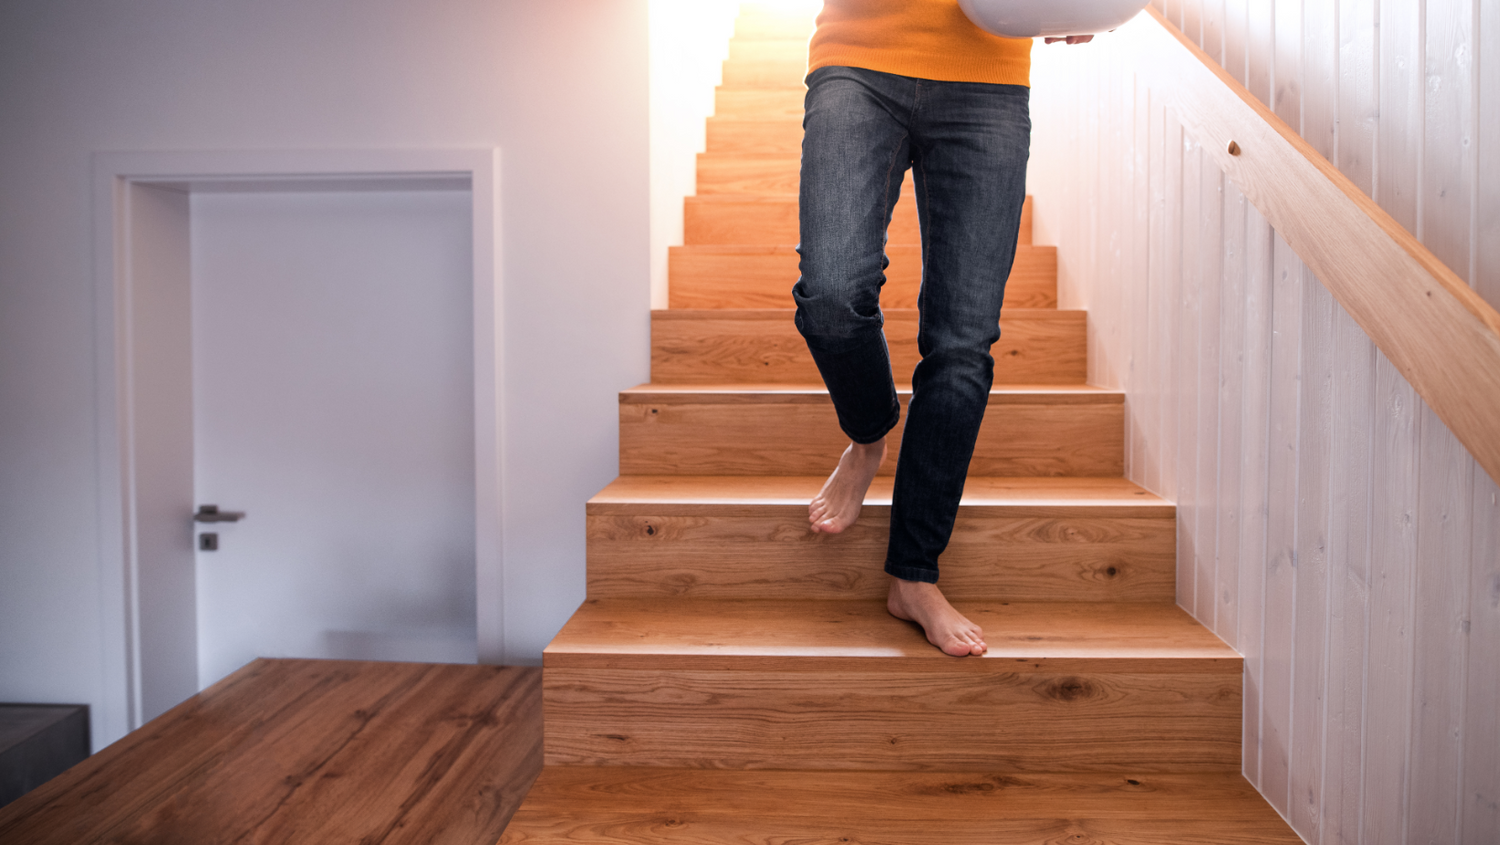 What Can Be Used As Stair Treads?